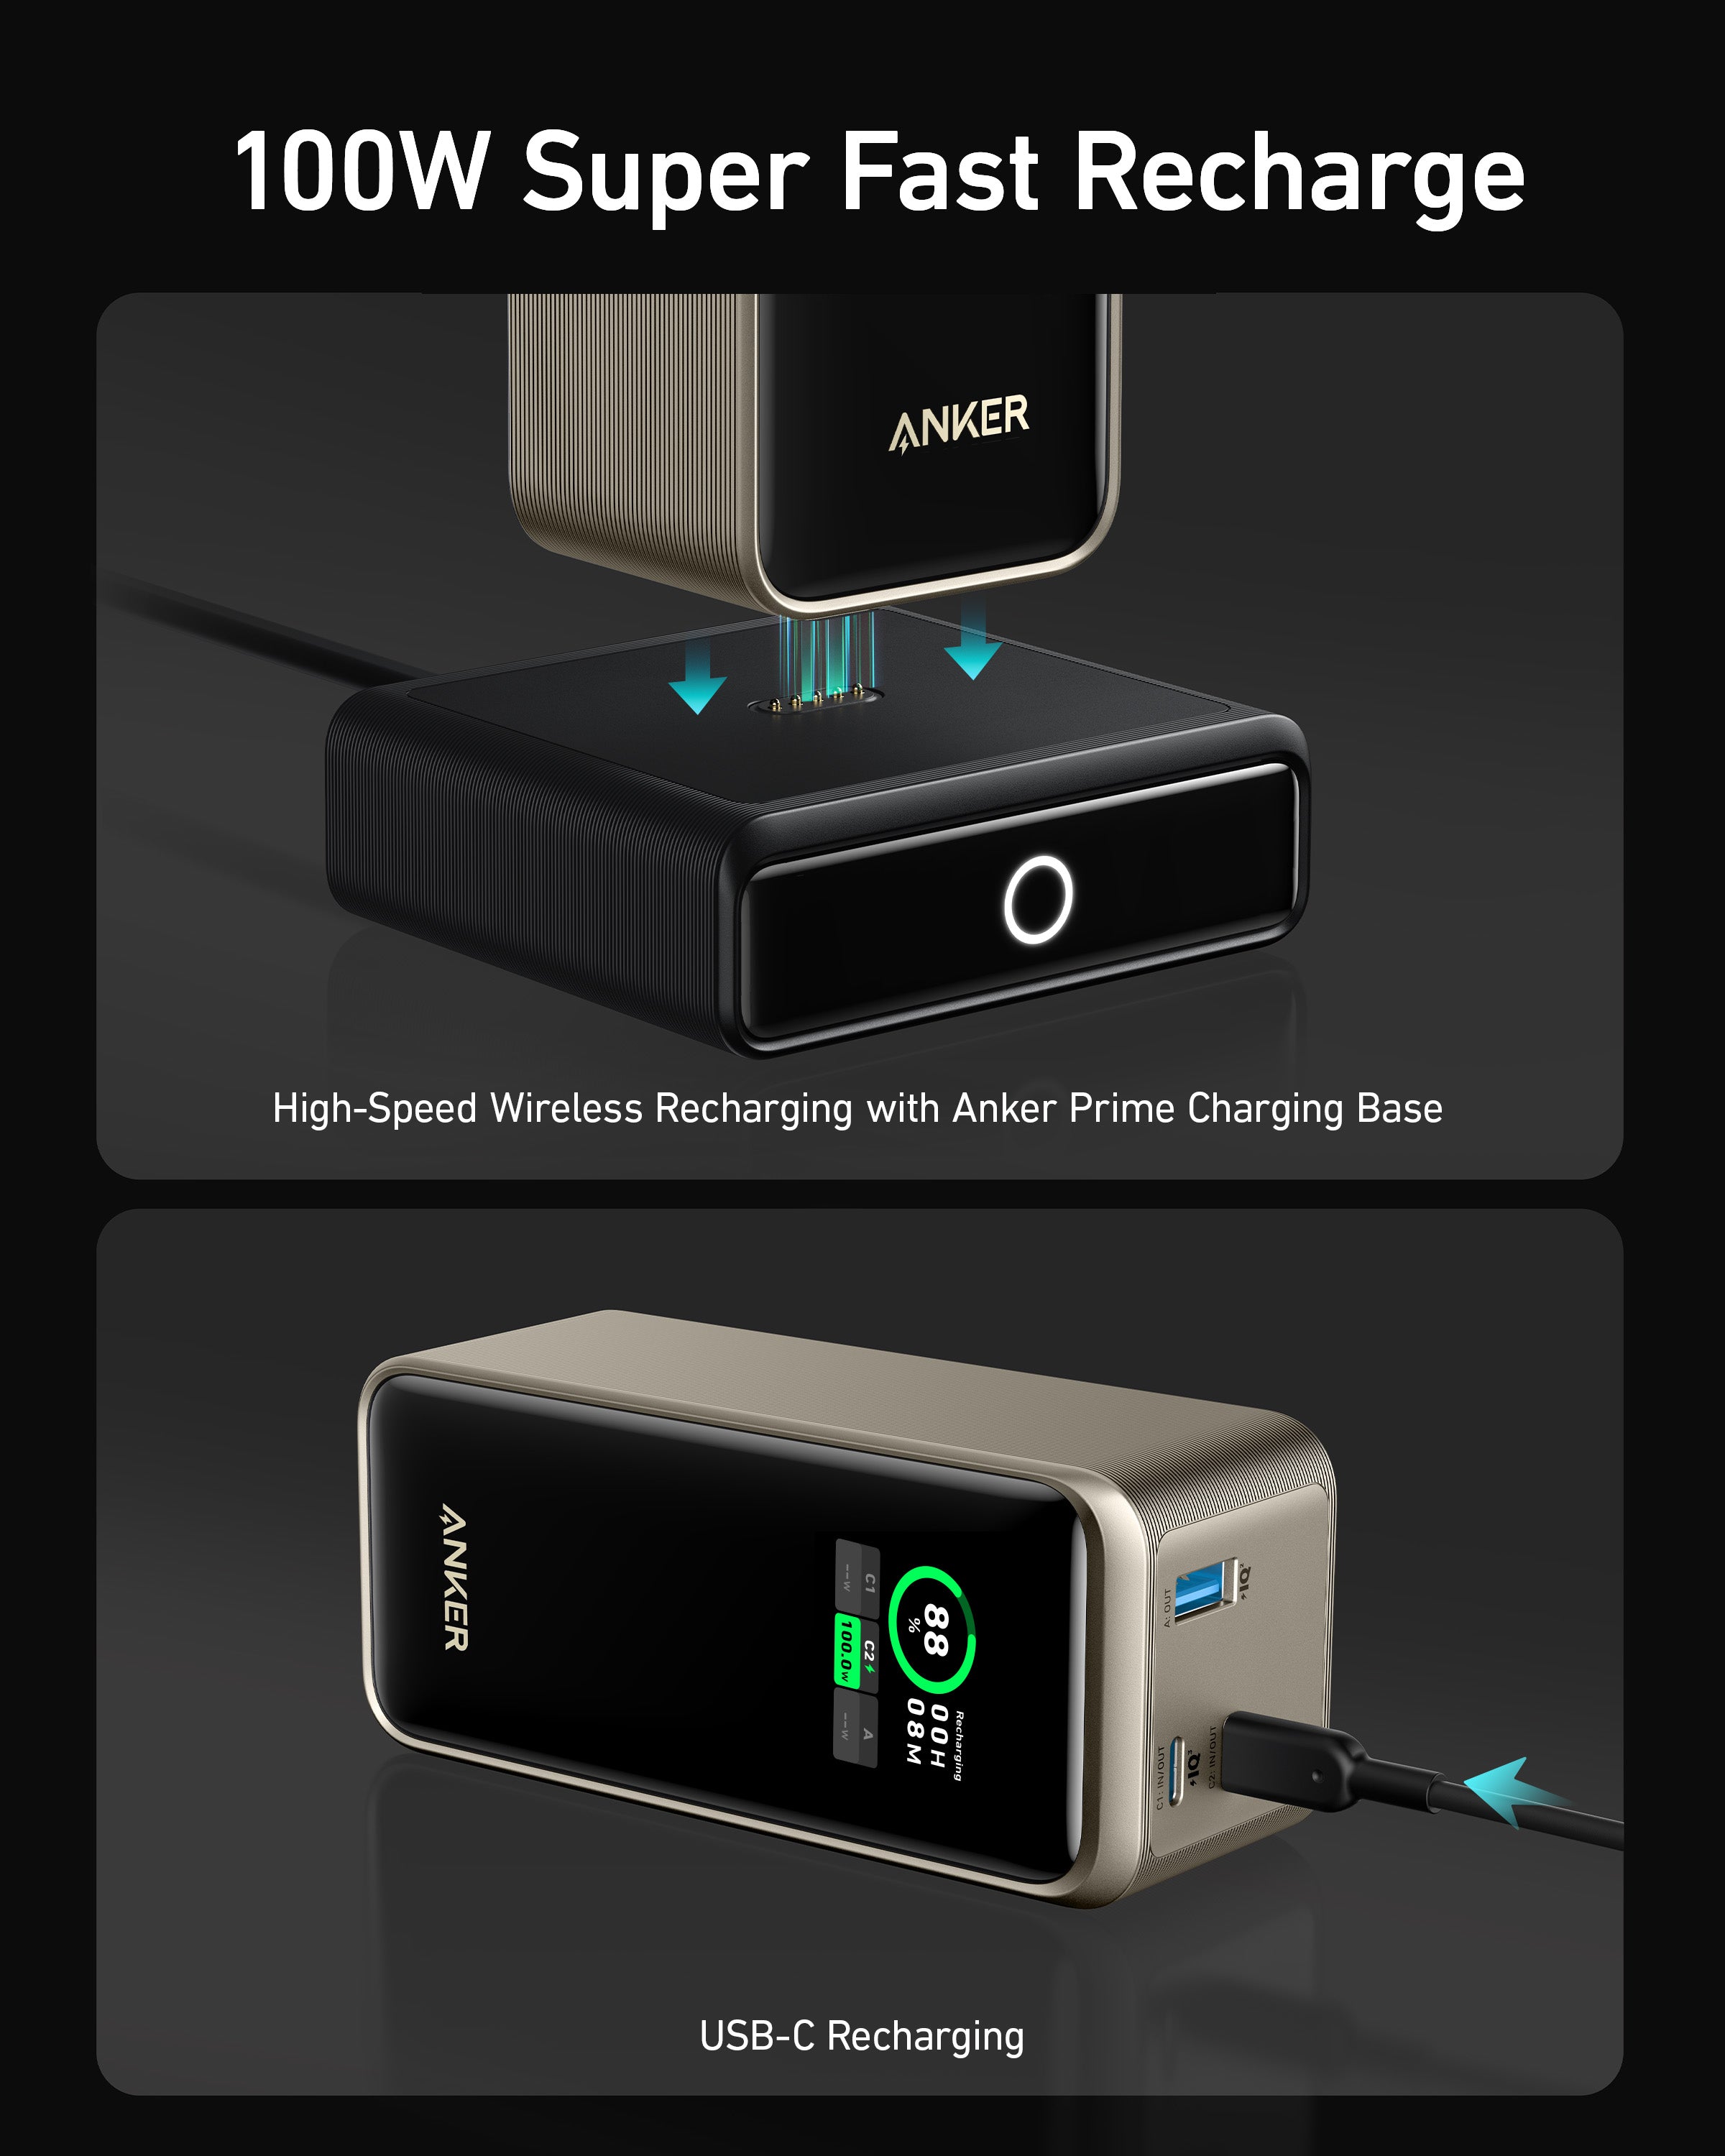 Anker Prime Power Bank 20000mAh 200W USB-C Portable Charger 3-Ports Battery  Pack